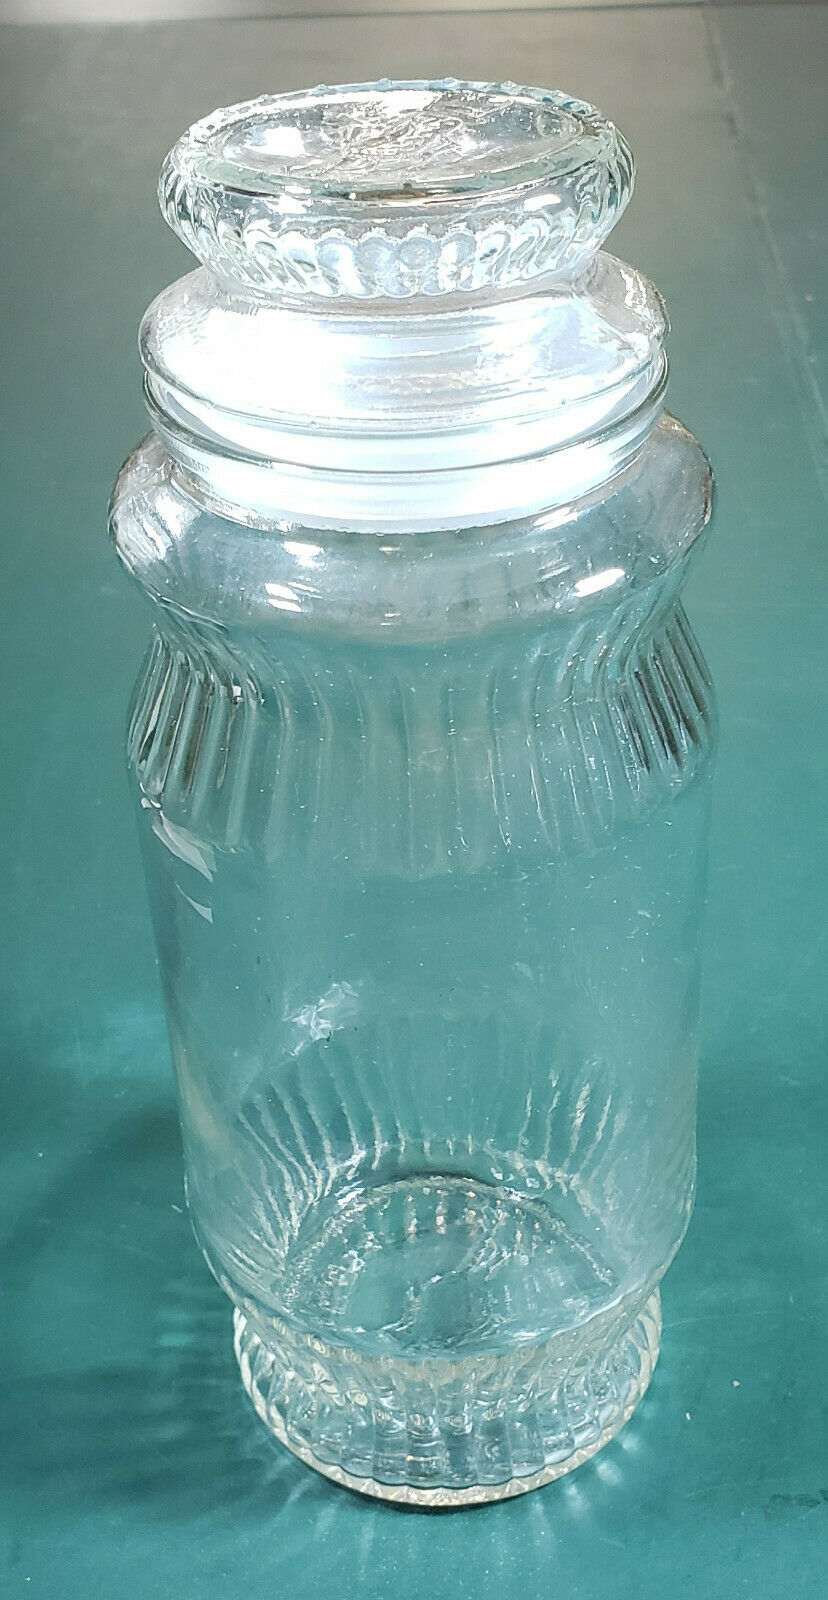 Vintage Mr. Peanuts Glass Jar Canister Ribbed Anchor Hocking 1979 Planters Nuts